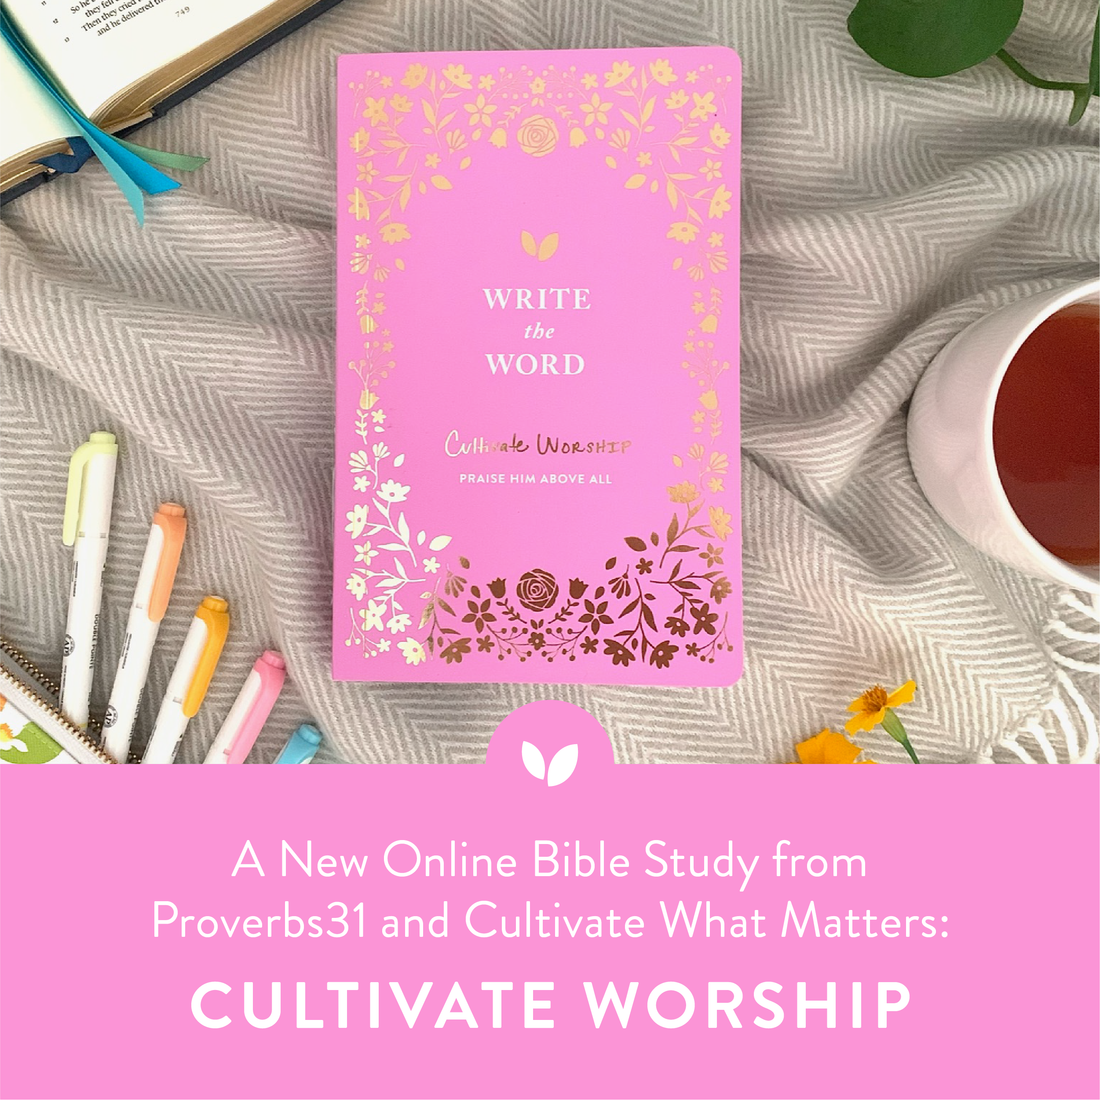 A New Online Bible Study from Proverbs31 and Cultivate What Matters—Cultivate Worship